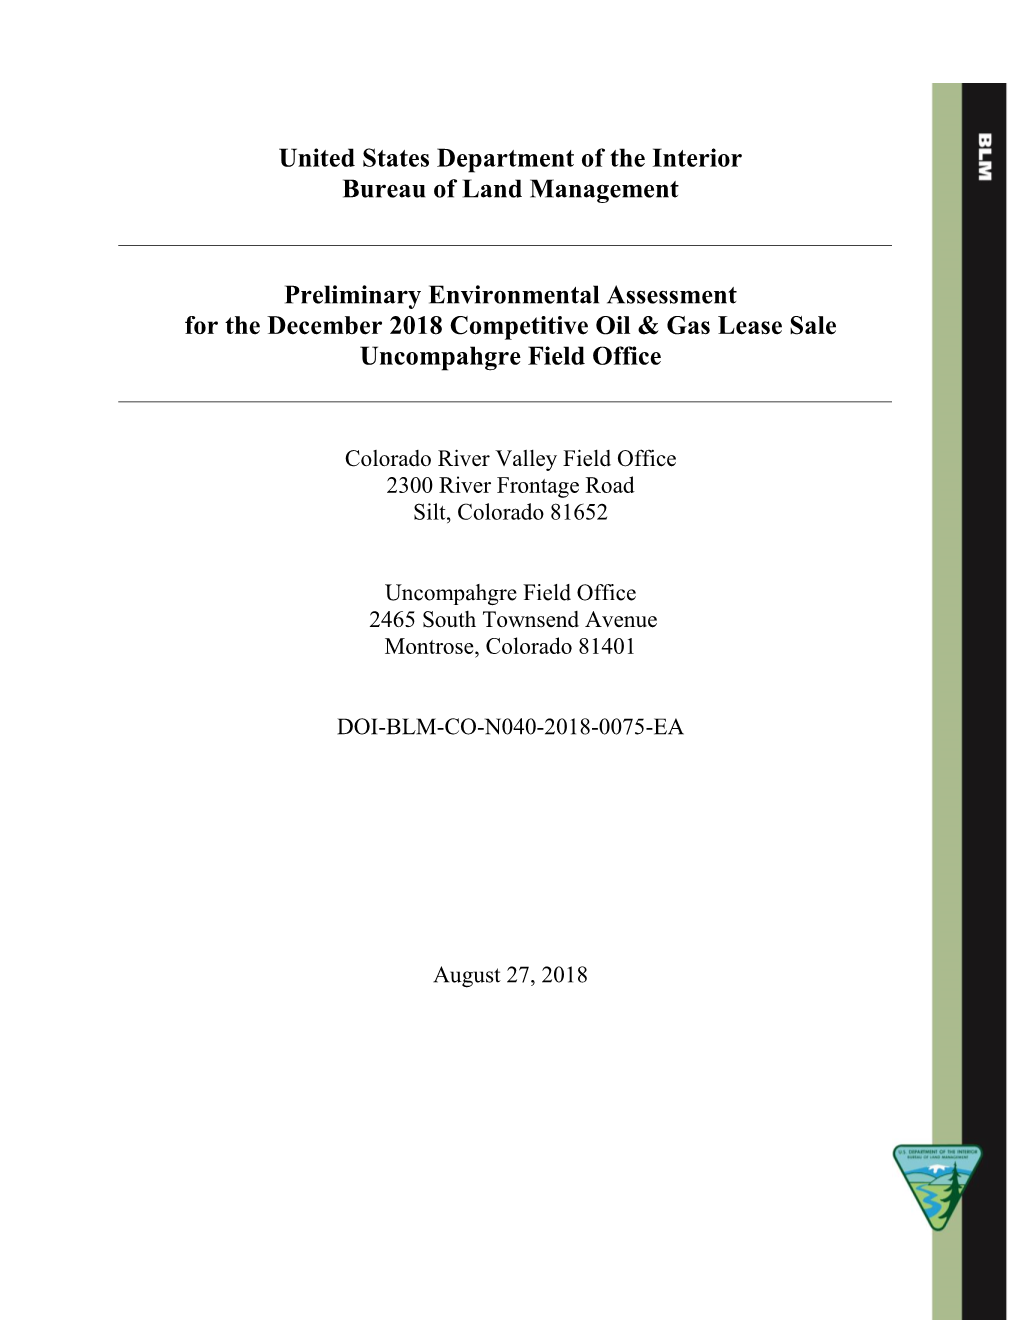 Environmental Assessment for the December 2018 Competitive Oil & Gas Lease Sale Uncompahgre Field Office